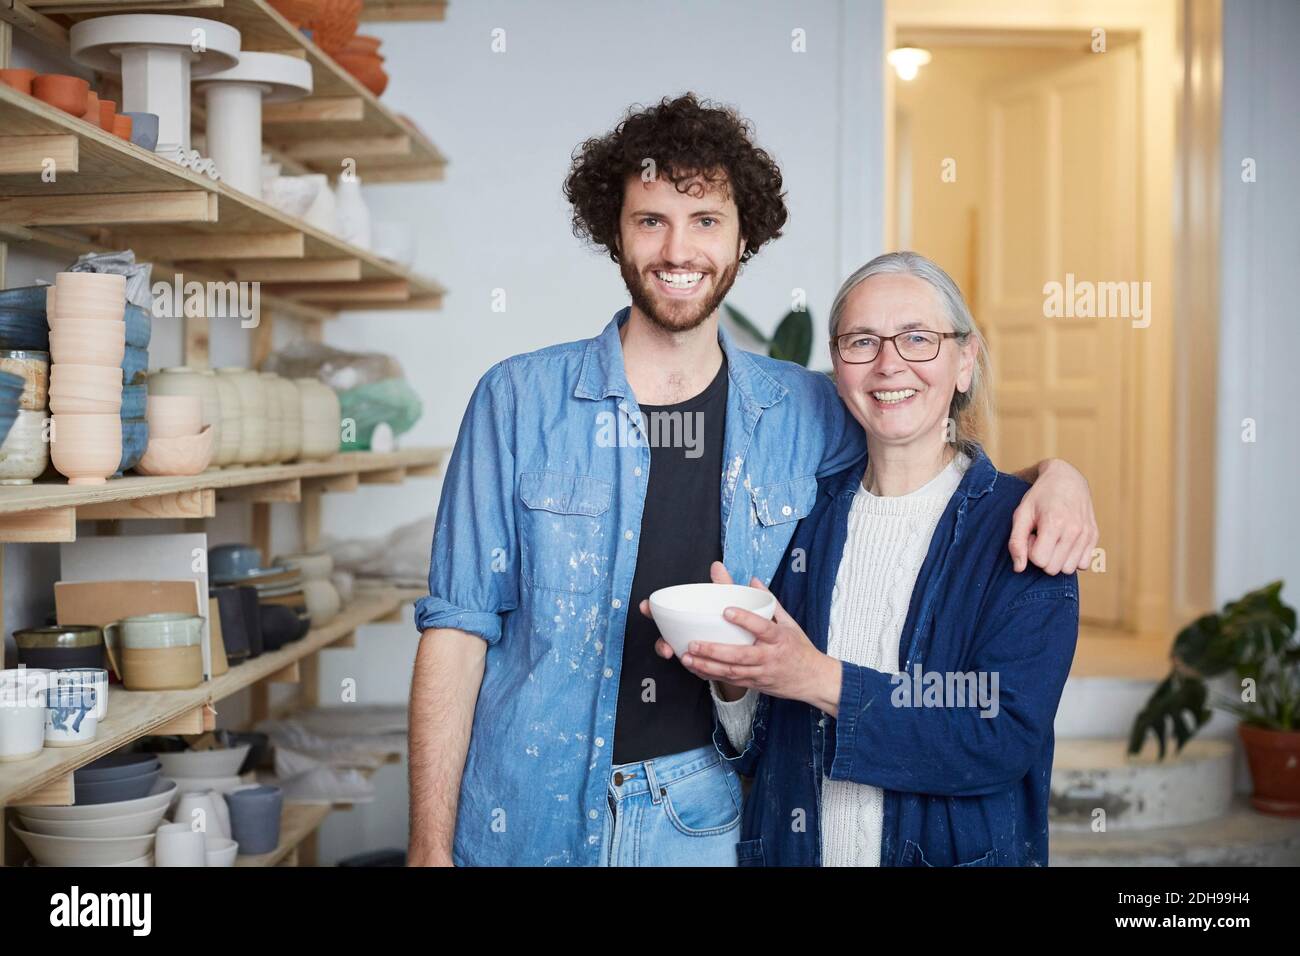 Portrait of smiling man and woman in pottery class Stock Photo